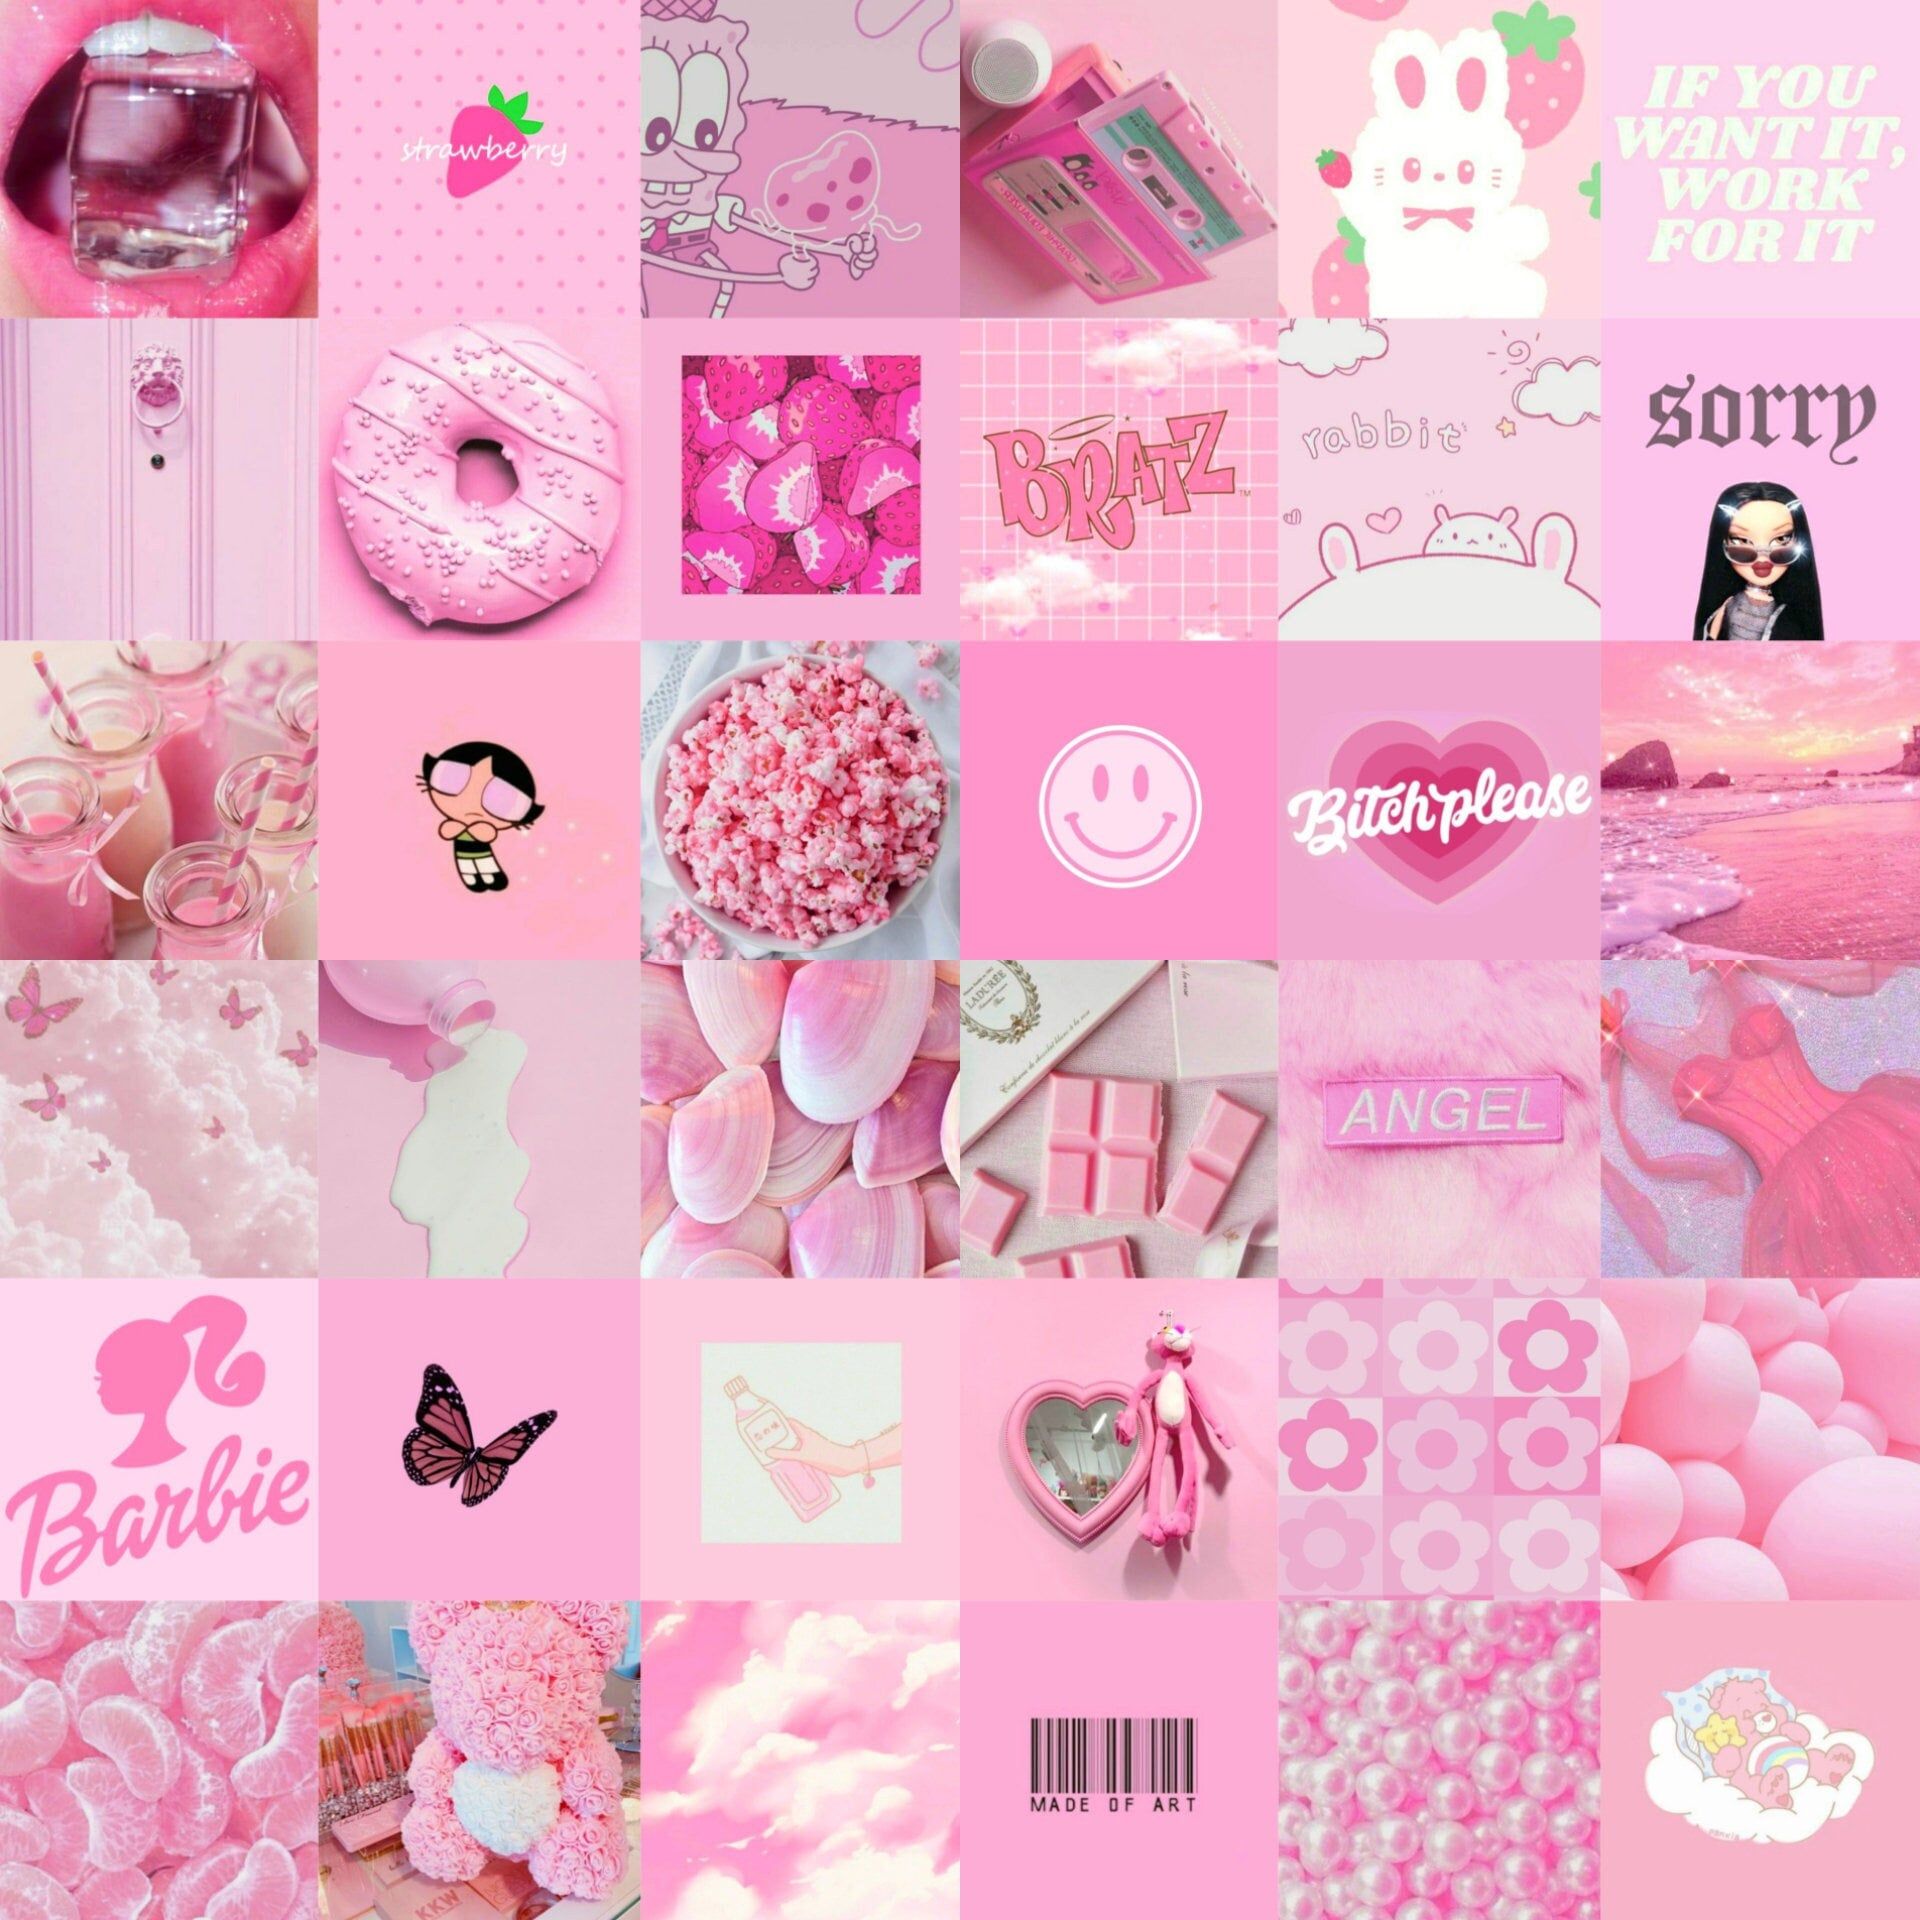 Aesthetic background for phone and desktop wallpaper. - Light pink, pink, pink phone, 2000s, Barbie, collage, pink collage, angels, soft pink